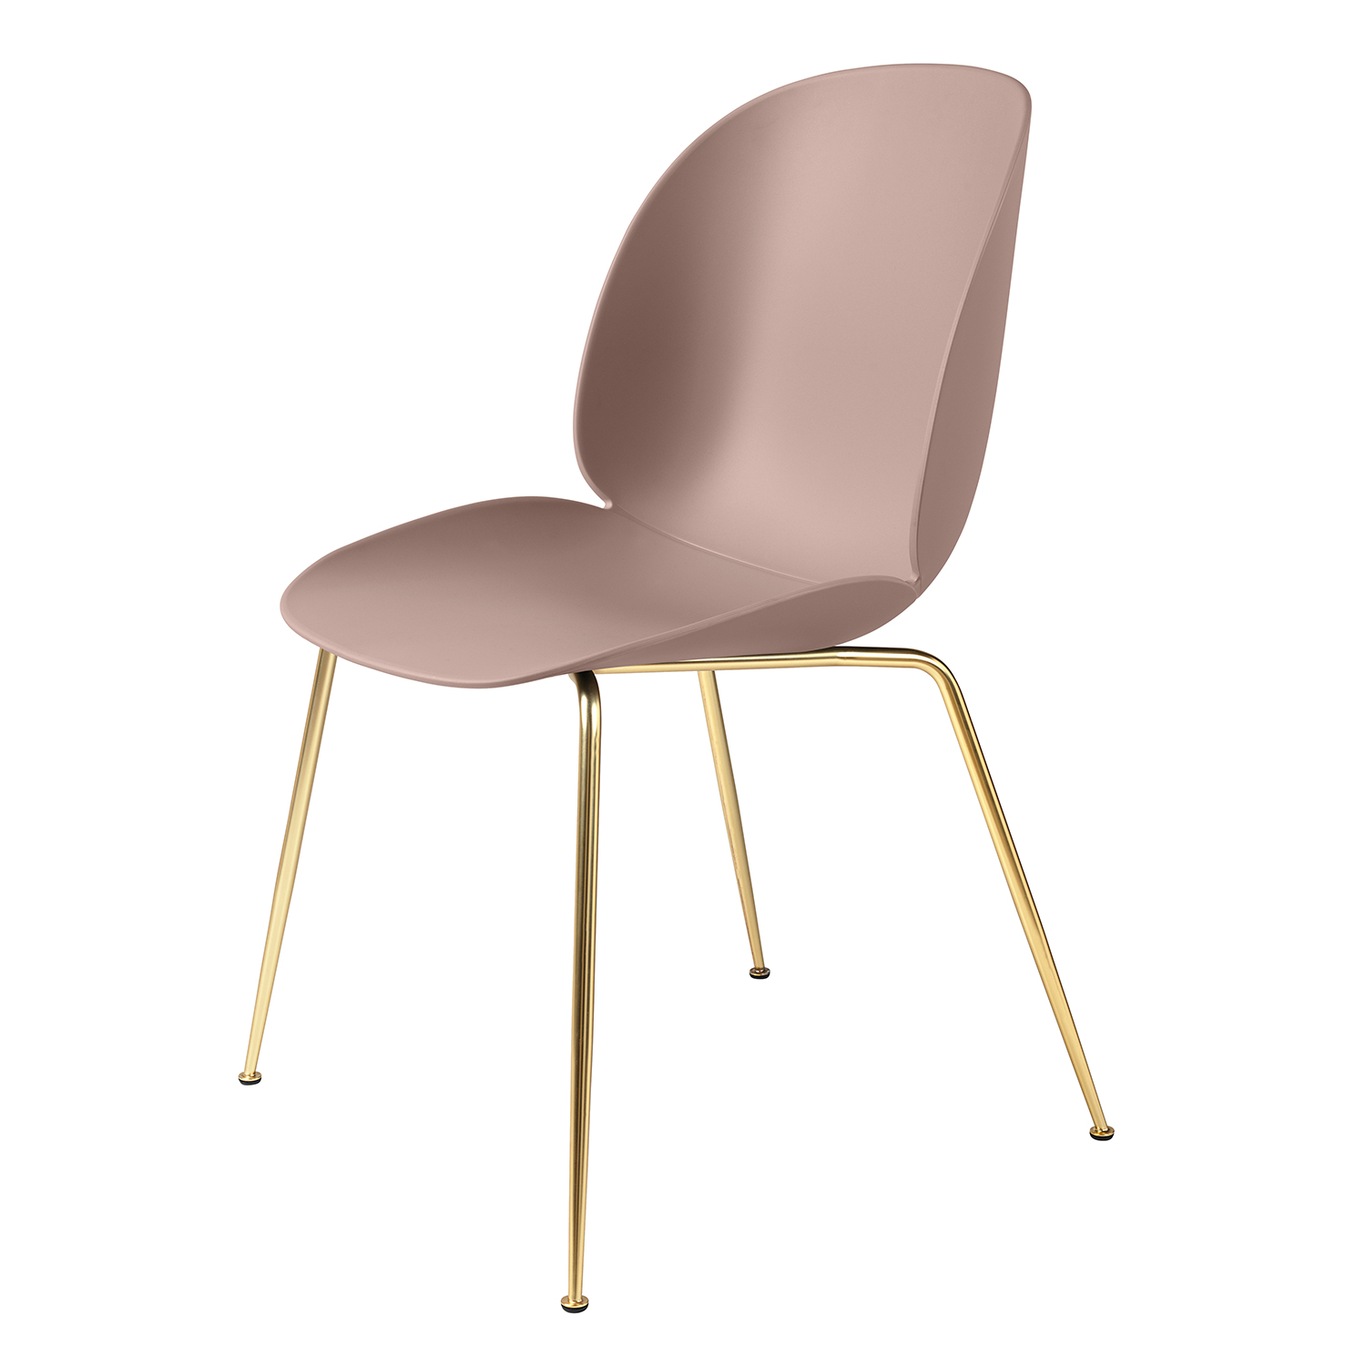 Beetle Dining Chair Un-upholstered, Conic Base Brass, Sweet Pink